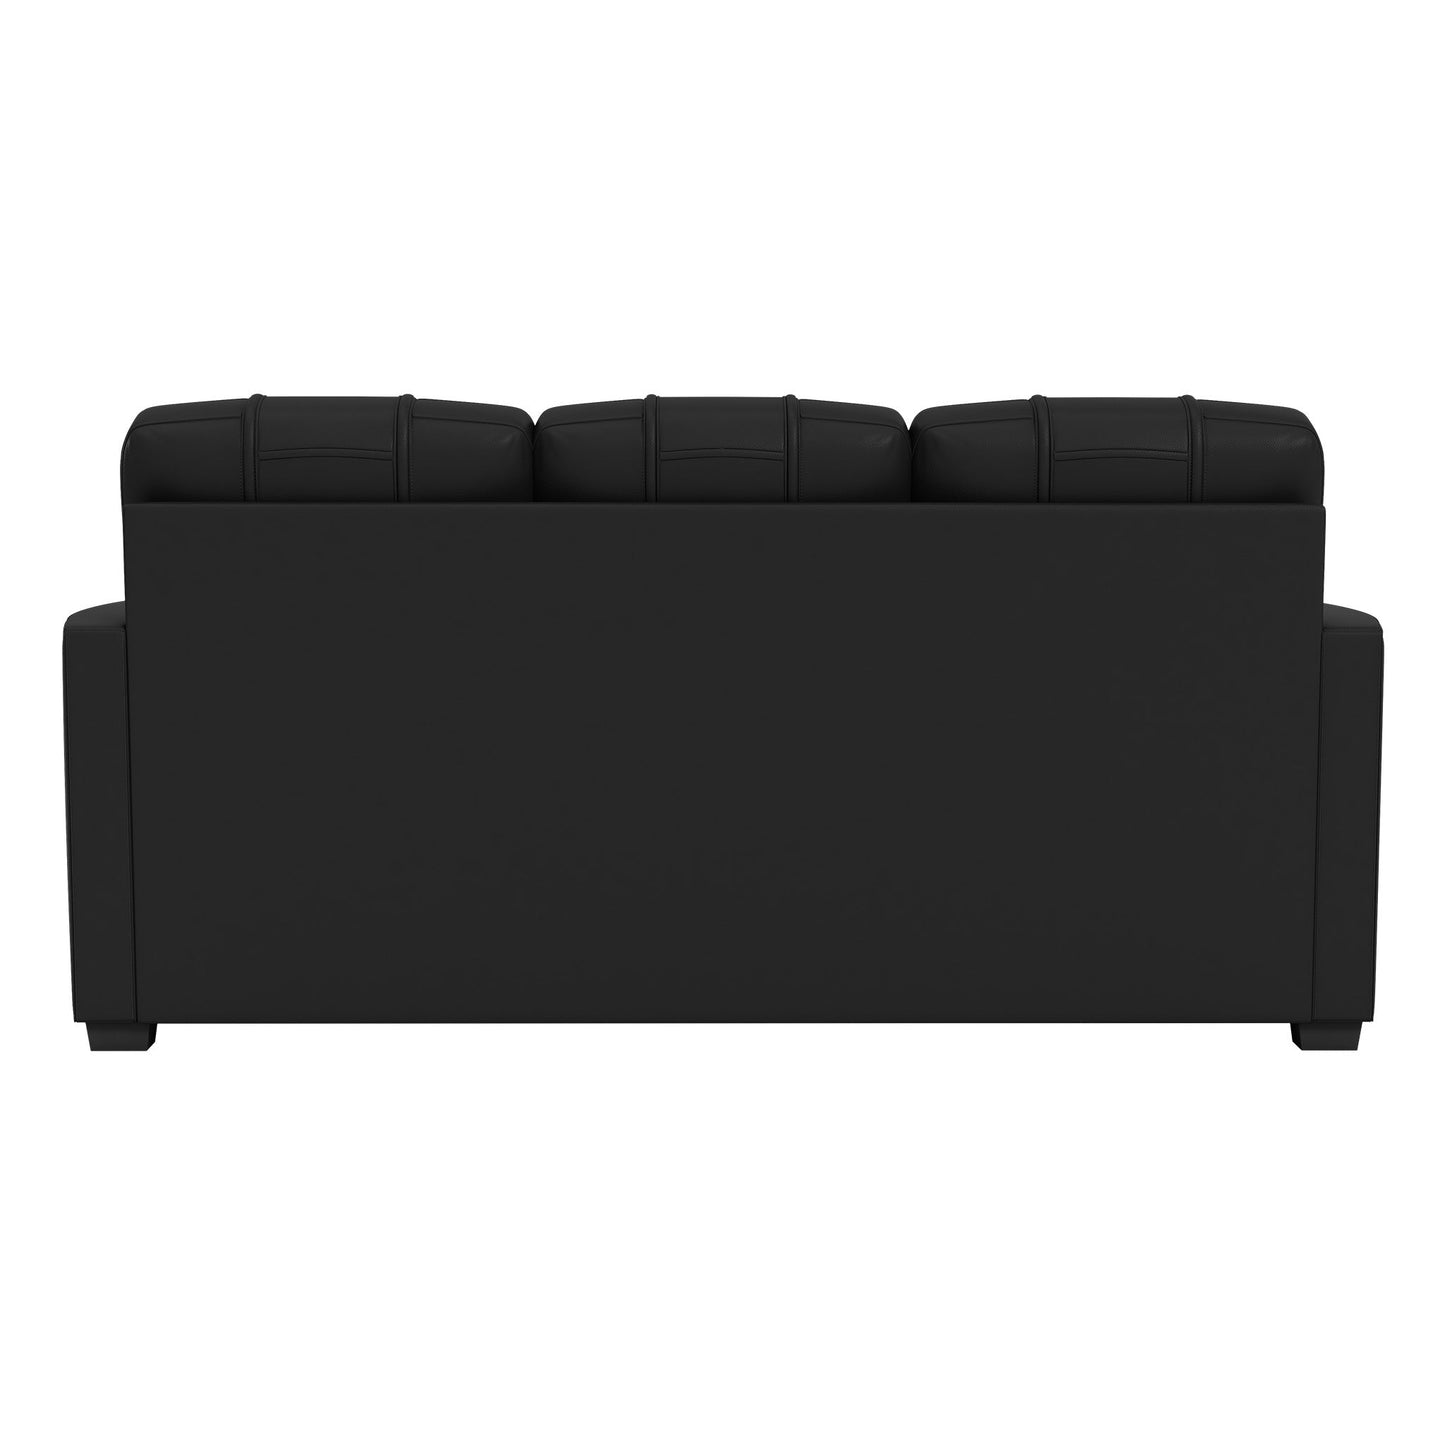 Silver Sofa with Bowling Logo Panel